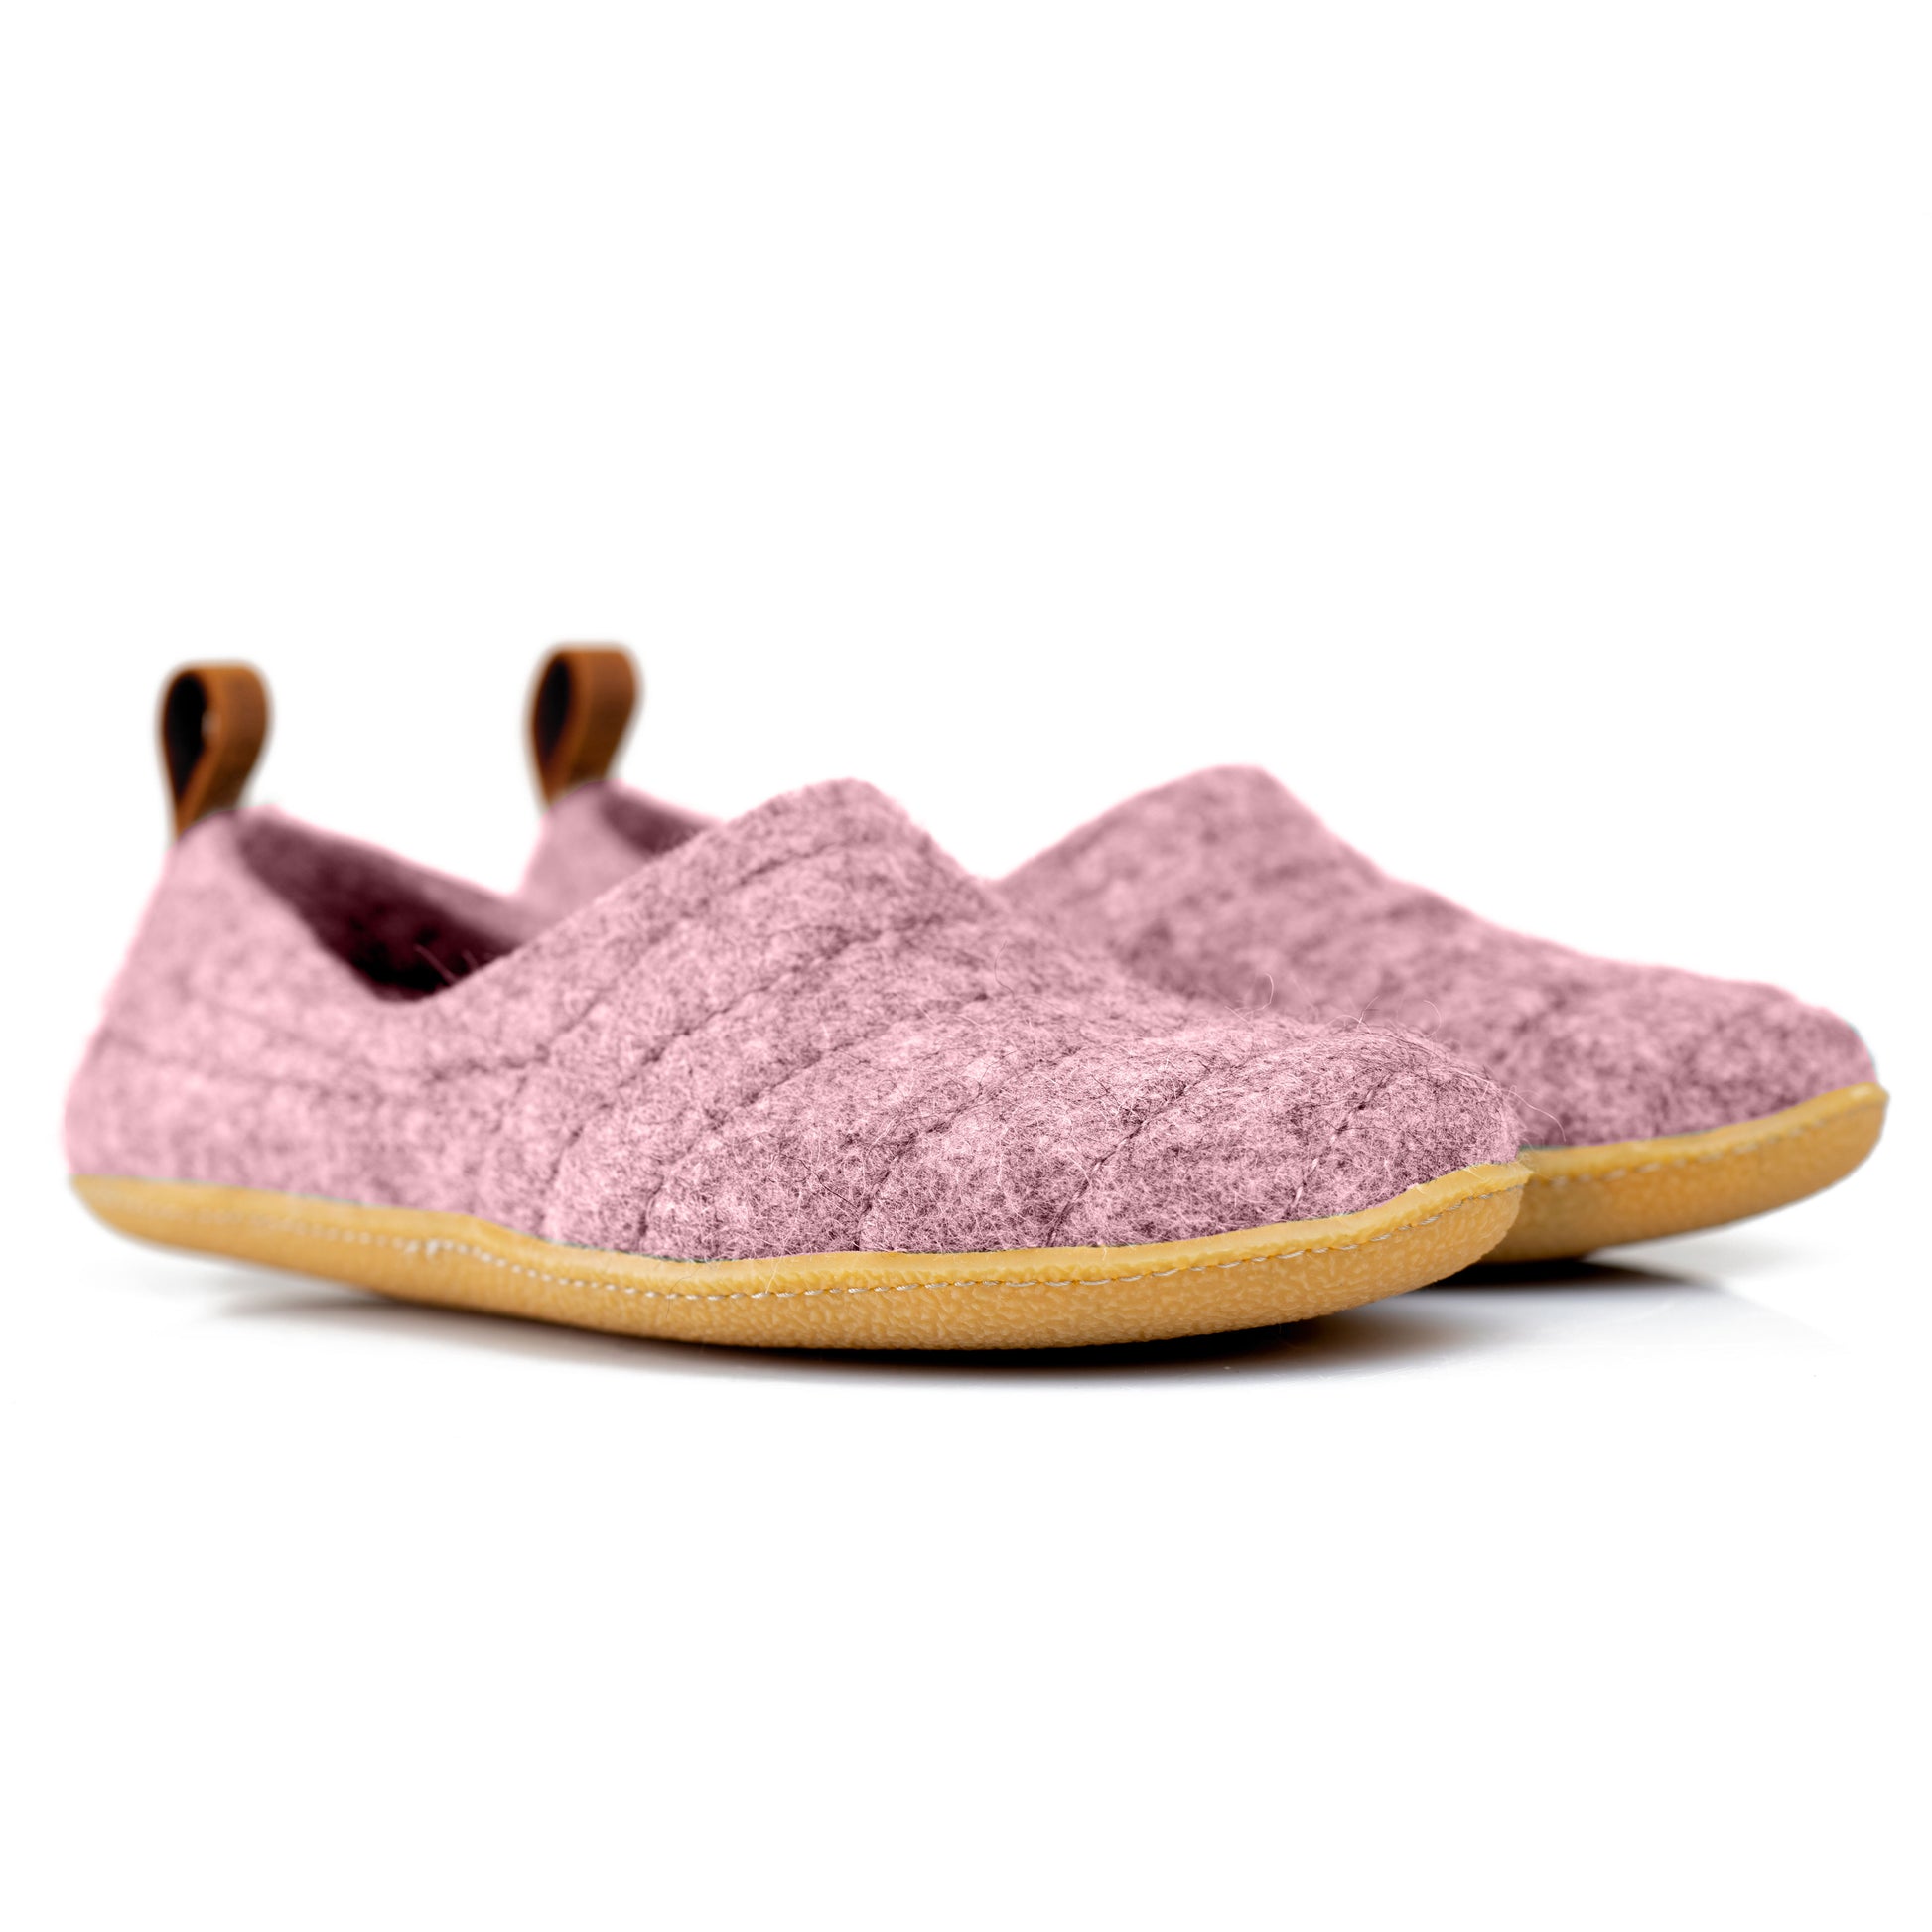 Pale Pink COCOON Felted Clog Slippers with Pull Loop by BureBure – BureBure shoes and